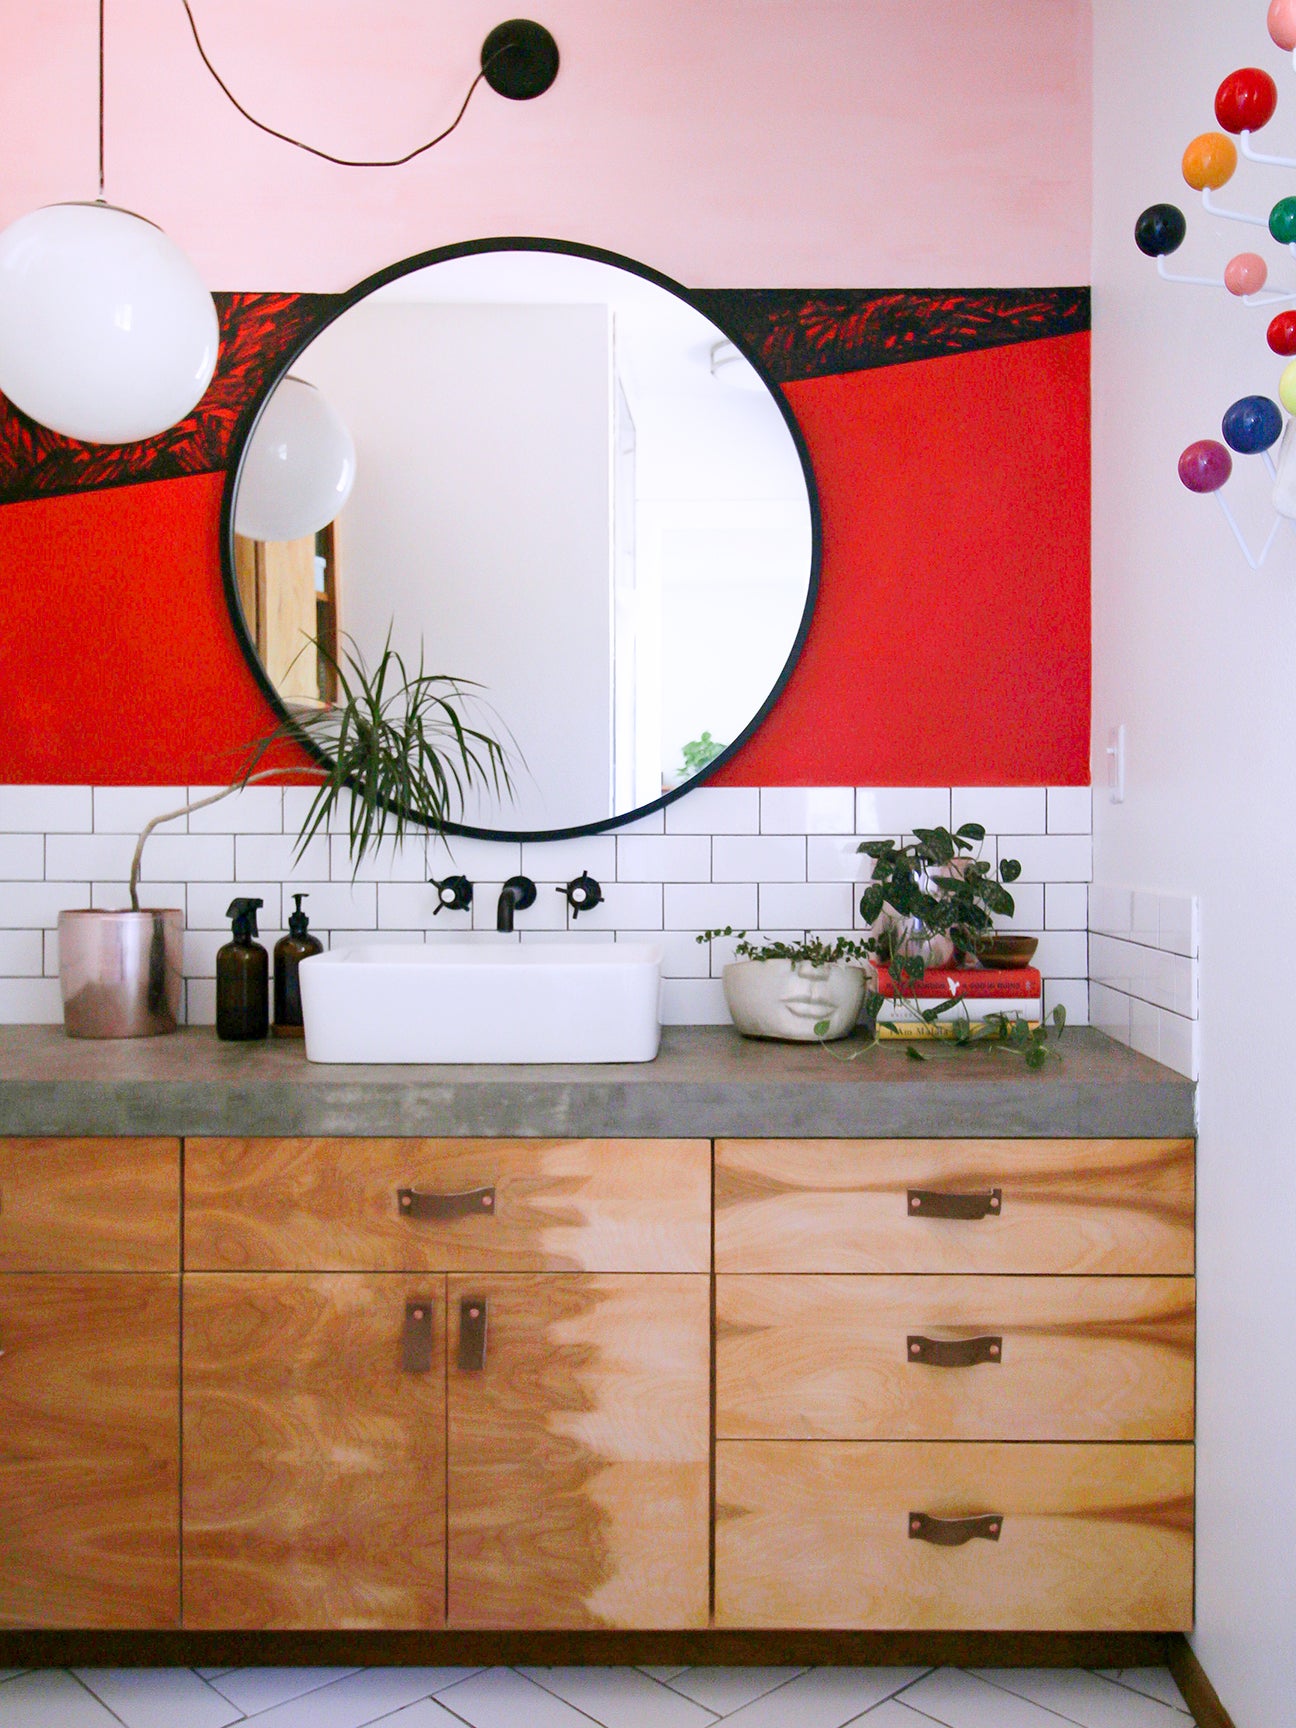 4 Paint Projects That Took This Muralist’s Home from All-Gray to Technicolor